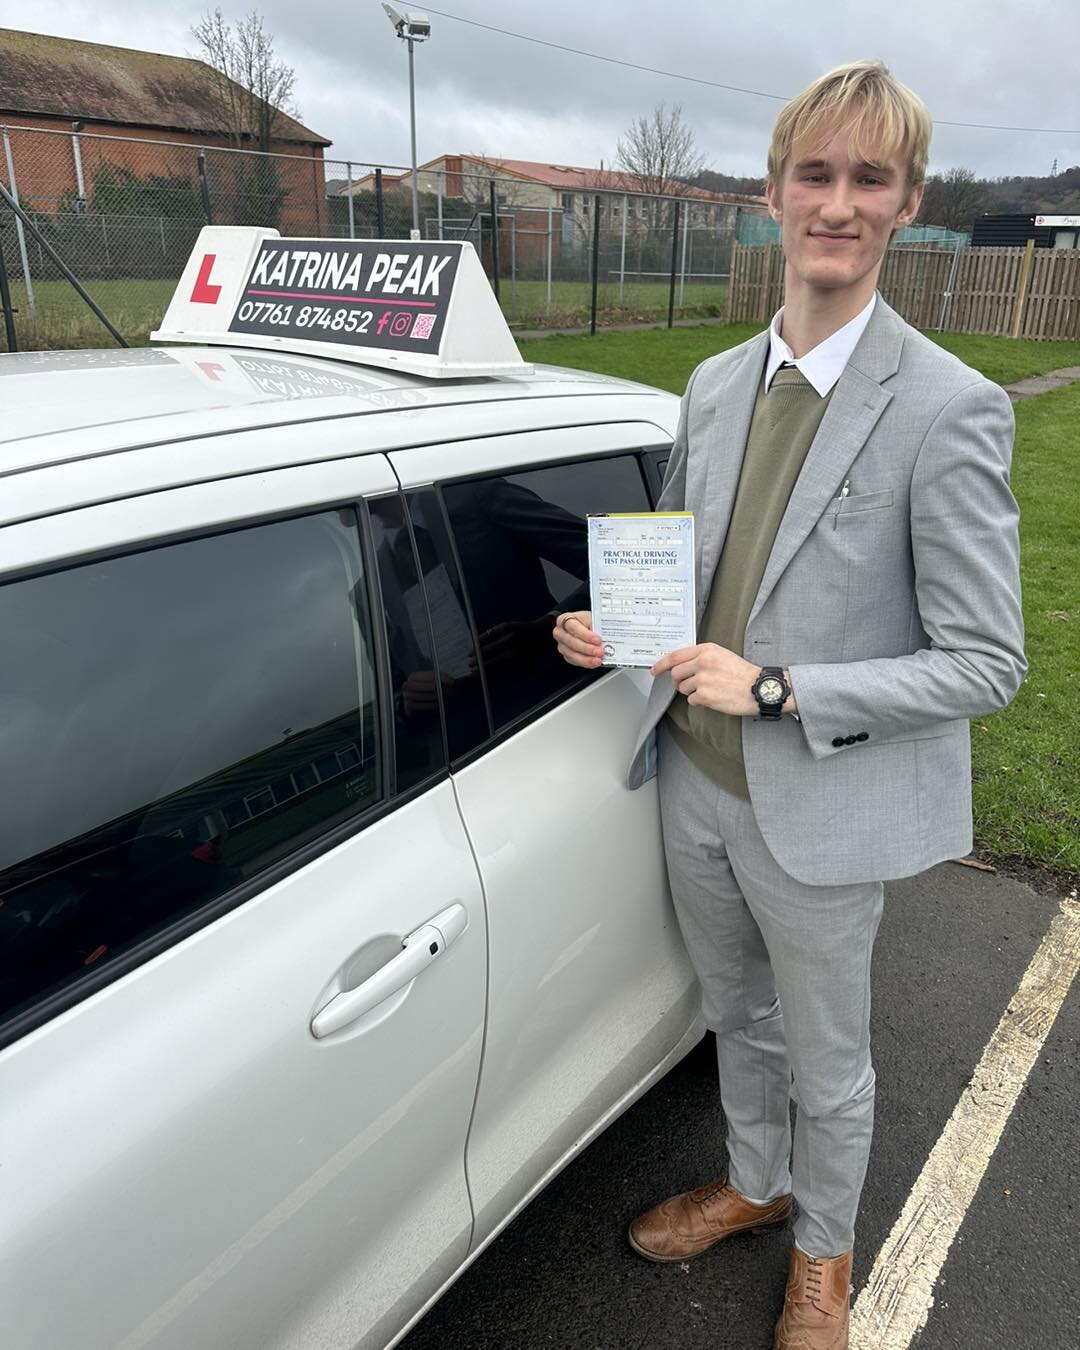 Huge congratulations to Alex who passed his driving test today at the first attempt with only 3 faults! Wishing you every success and I&rsquo;ll see you on the road! 🚗🚙🥳🎉 #learntodrive #passyourdrivingtest #katrinapeakdrivingschool #folkestone